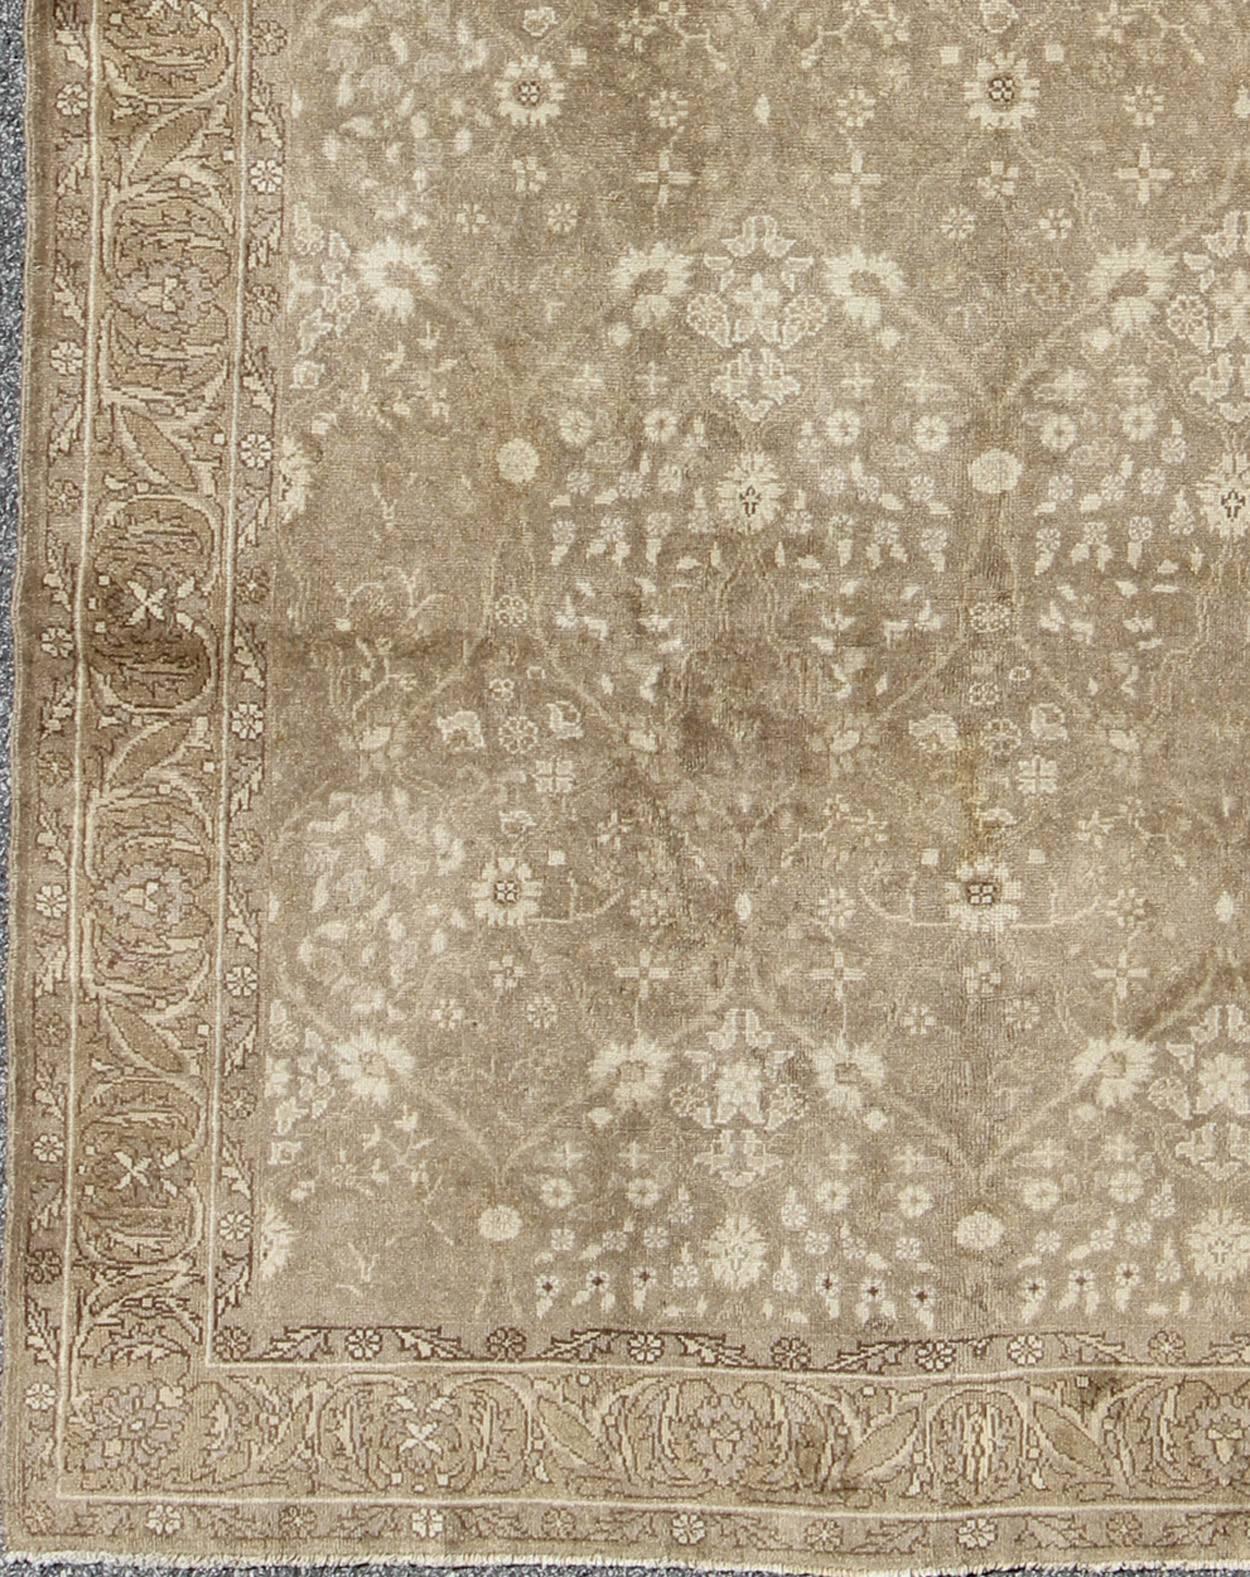 Antique Turkish Sivas rug with all-over botanical pattern in taupe, rug NA-54000, country of origin / type: Turkey / Sivas Oushak, circa early 20th century

The design of this beautiful Sivas rug from Turkey is enhanced by its lustrous wool. The